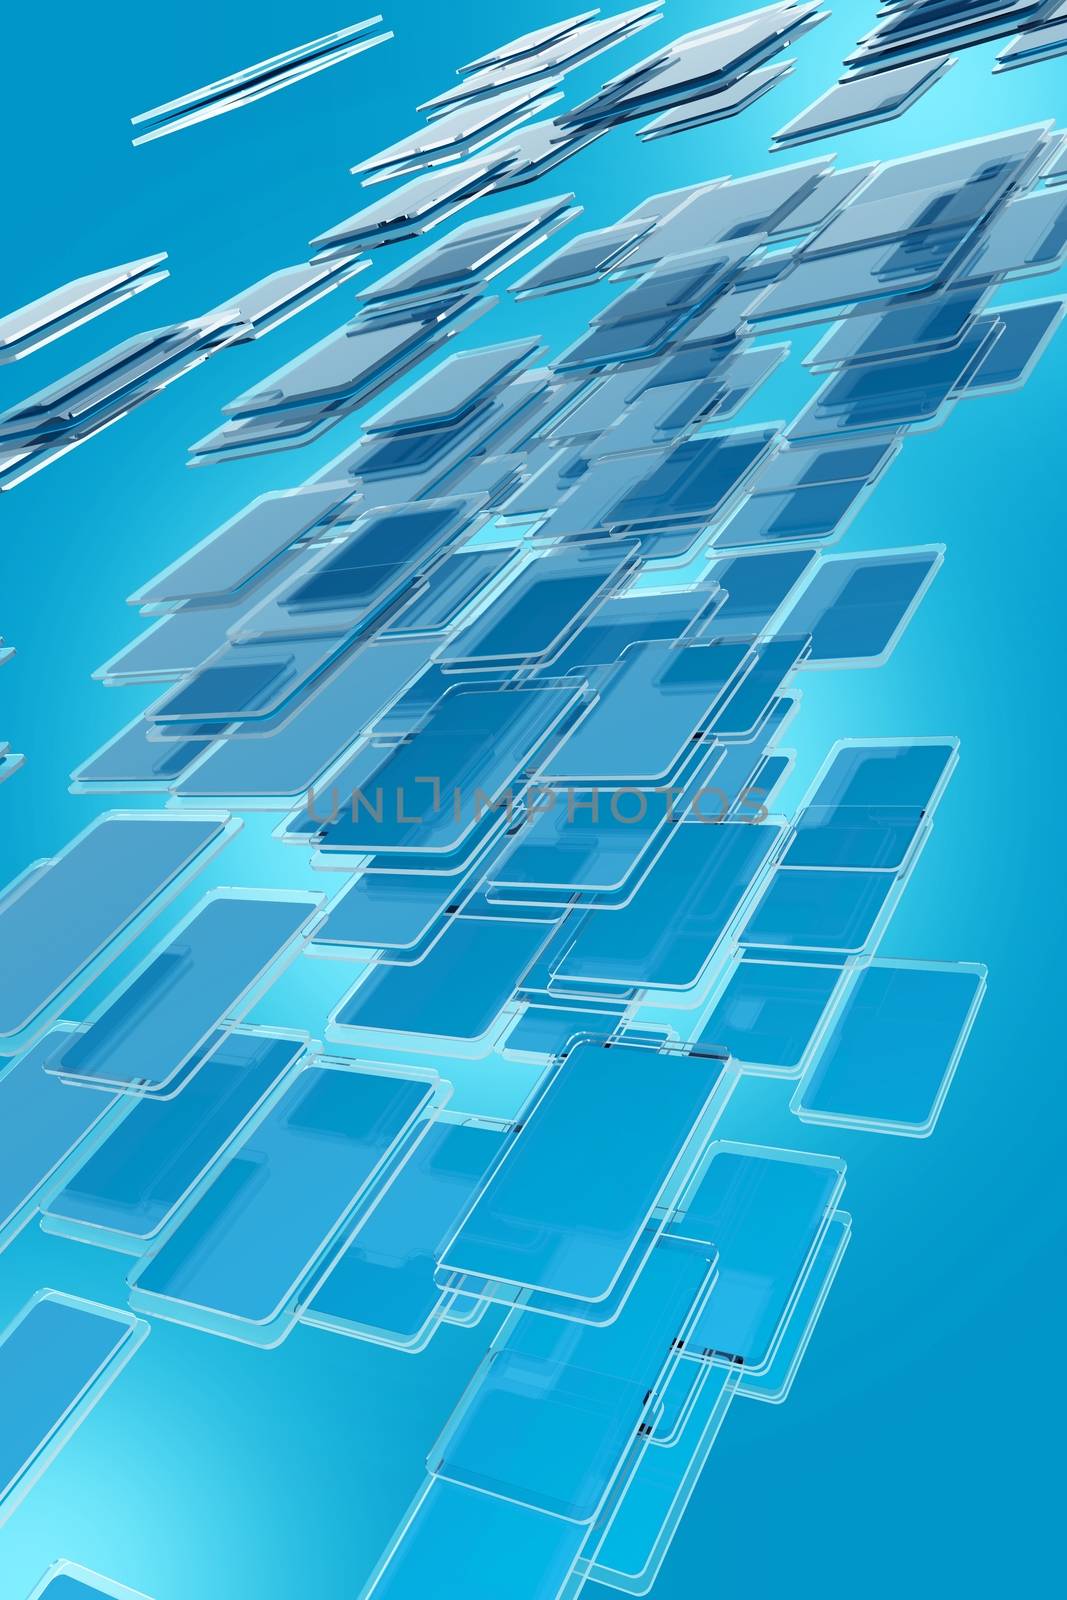 Abstract Blue Glassy Blocks Background. Vertical Glassy Blocks Background Design. 3D Rendered.